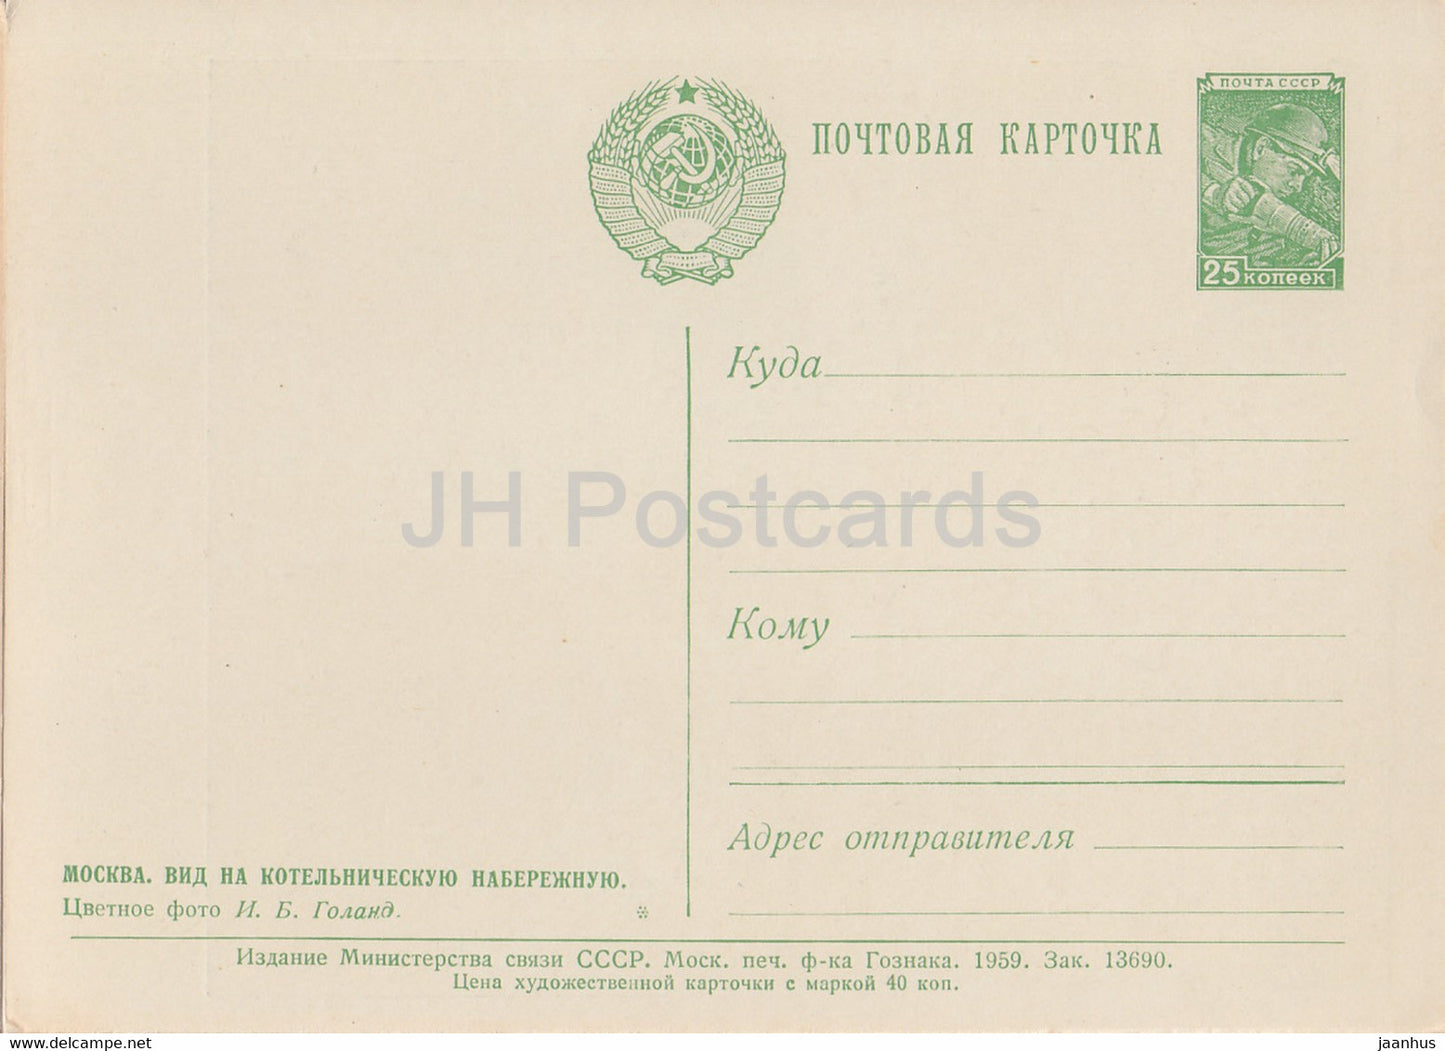 Moscow - View of the Kotelnicheskaya embankment - bus - truck - postal stationery - 1959 - Russia USSR - unused